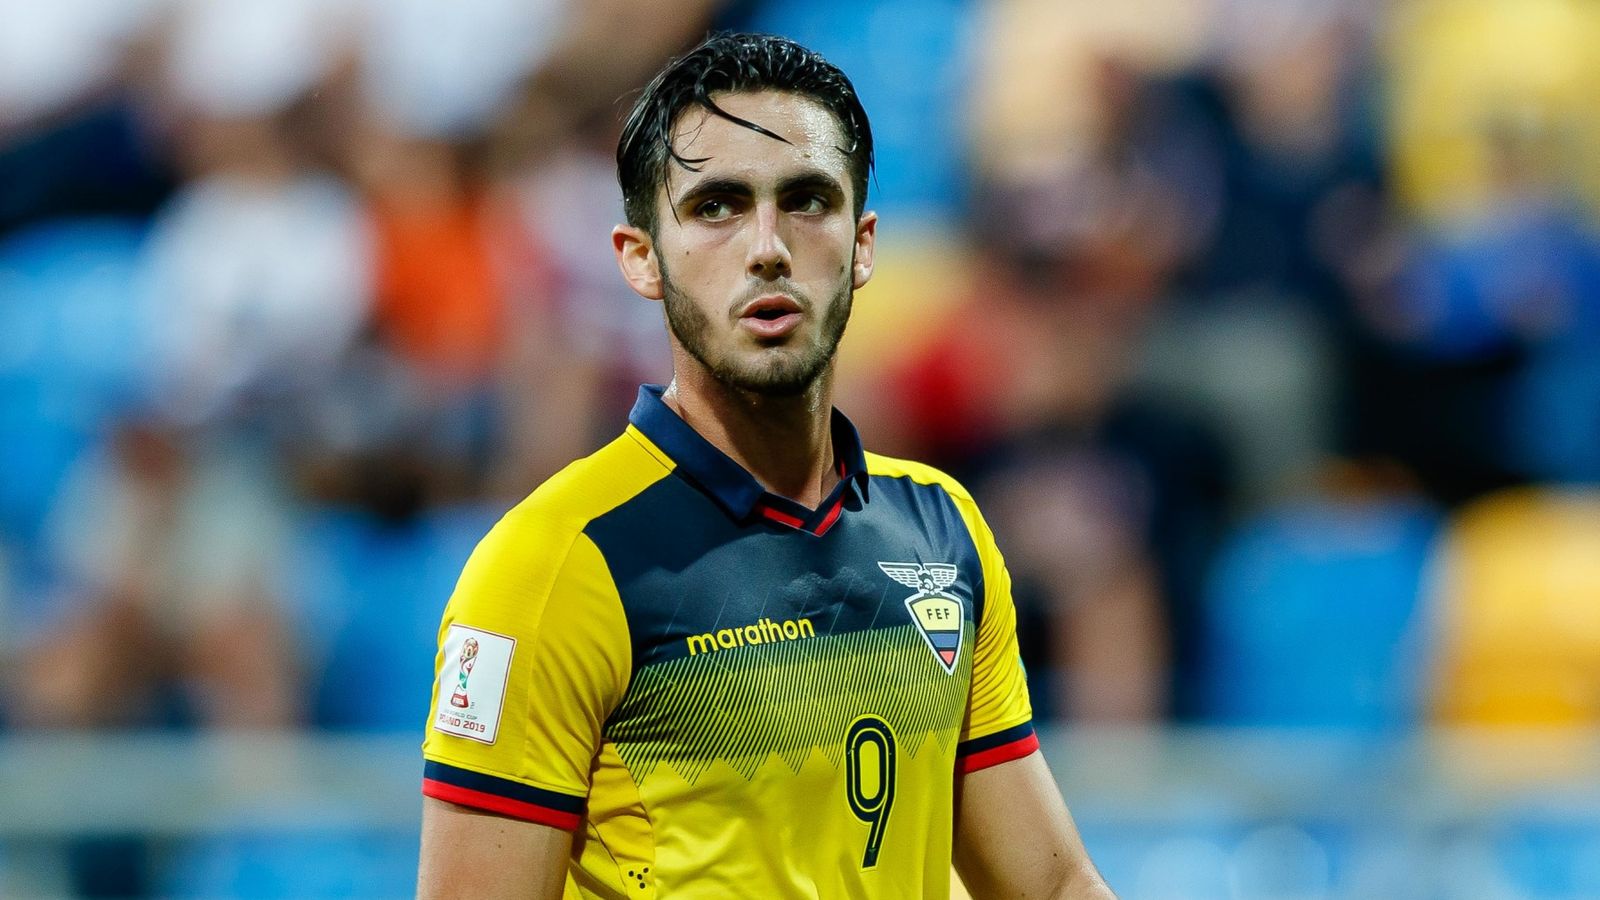 Leonardo Campana signs for Wolves on three-and-a-half year deal | Football News | Sky Sports